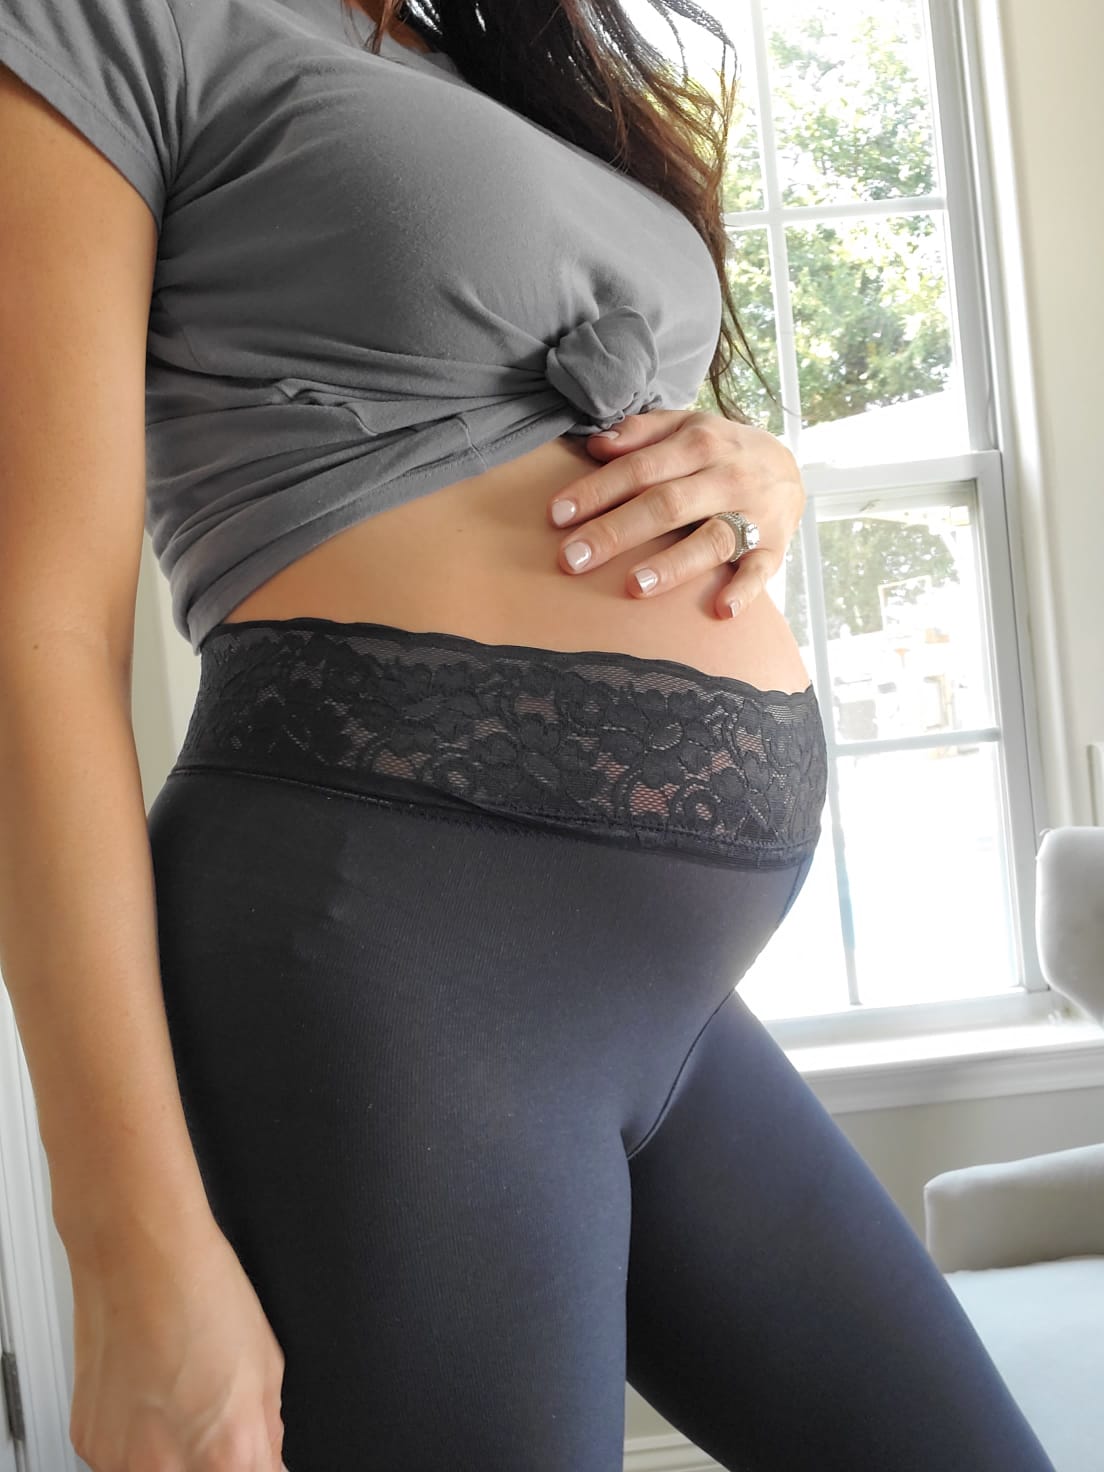 Best Maternity Tights - What to Look For? – Hipstik Legwear